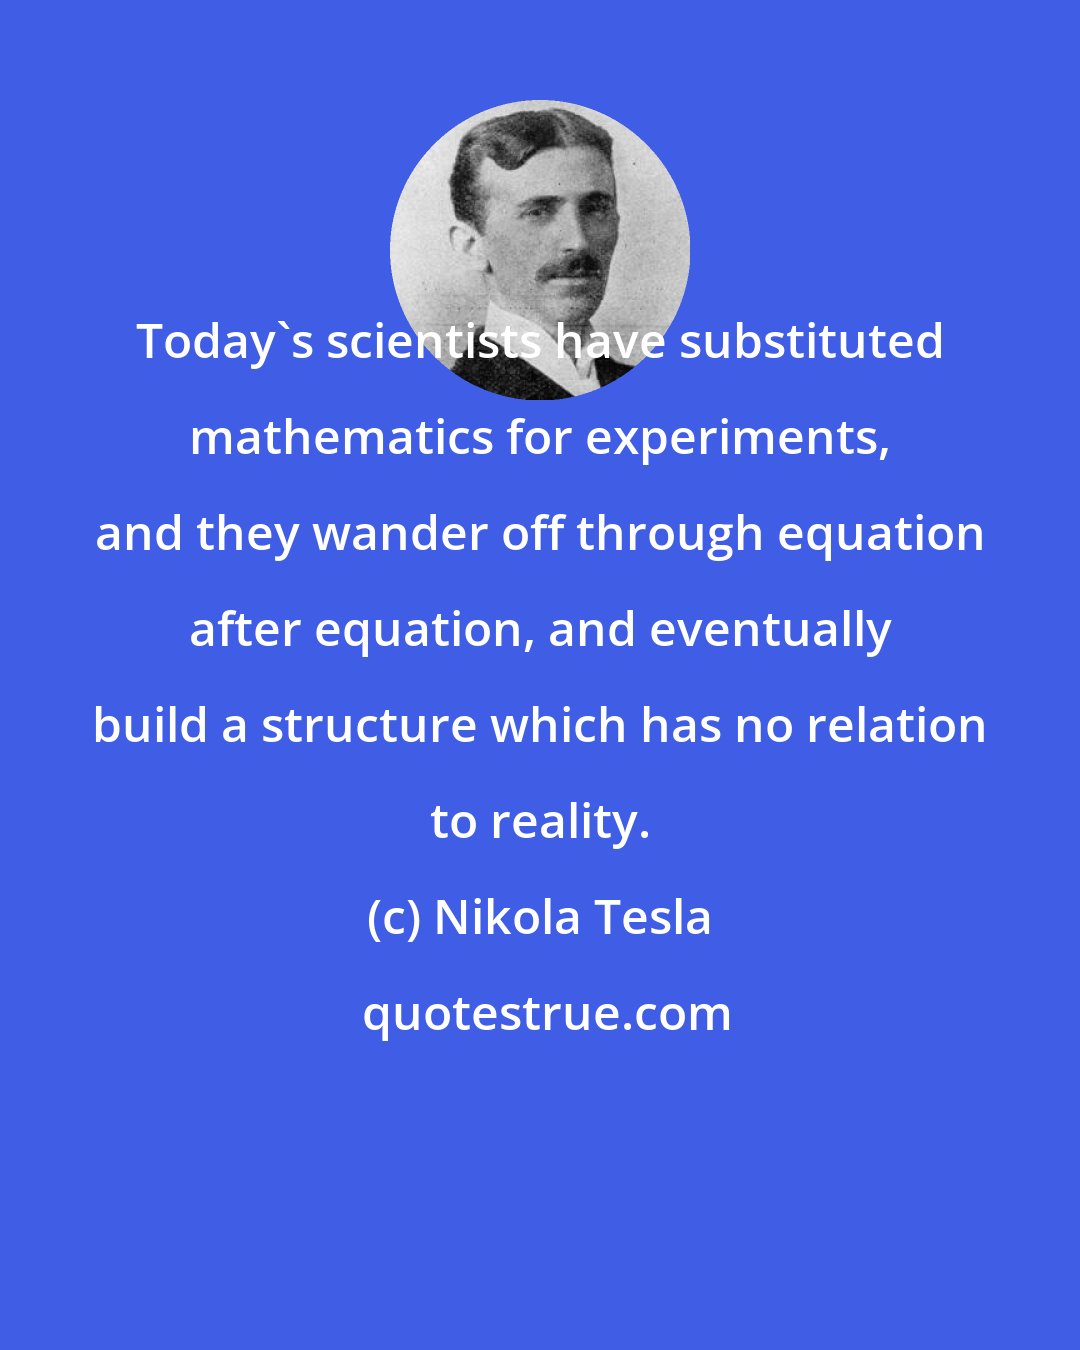 Nikola Tesla: Today's scientists have substituted mathematics for experiments, and they wander off through equation after equation, and eventually build a structure which has no relation to reality.